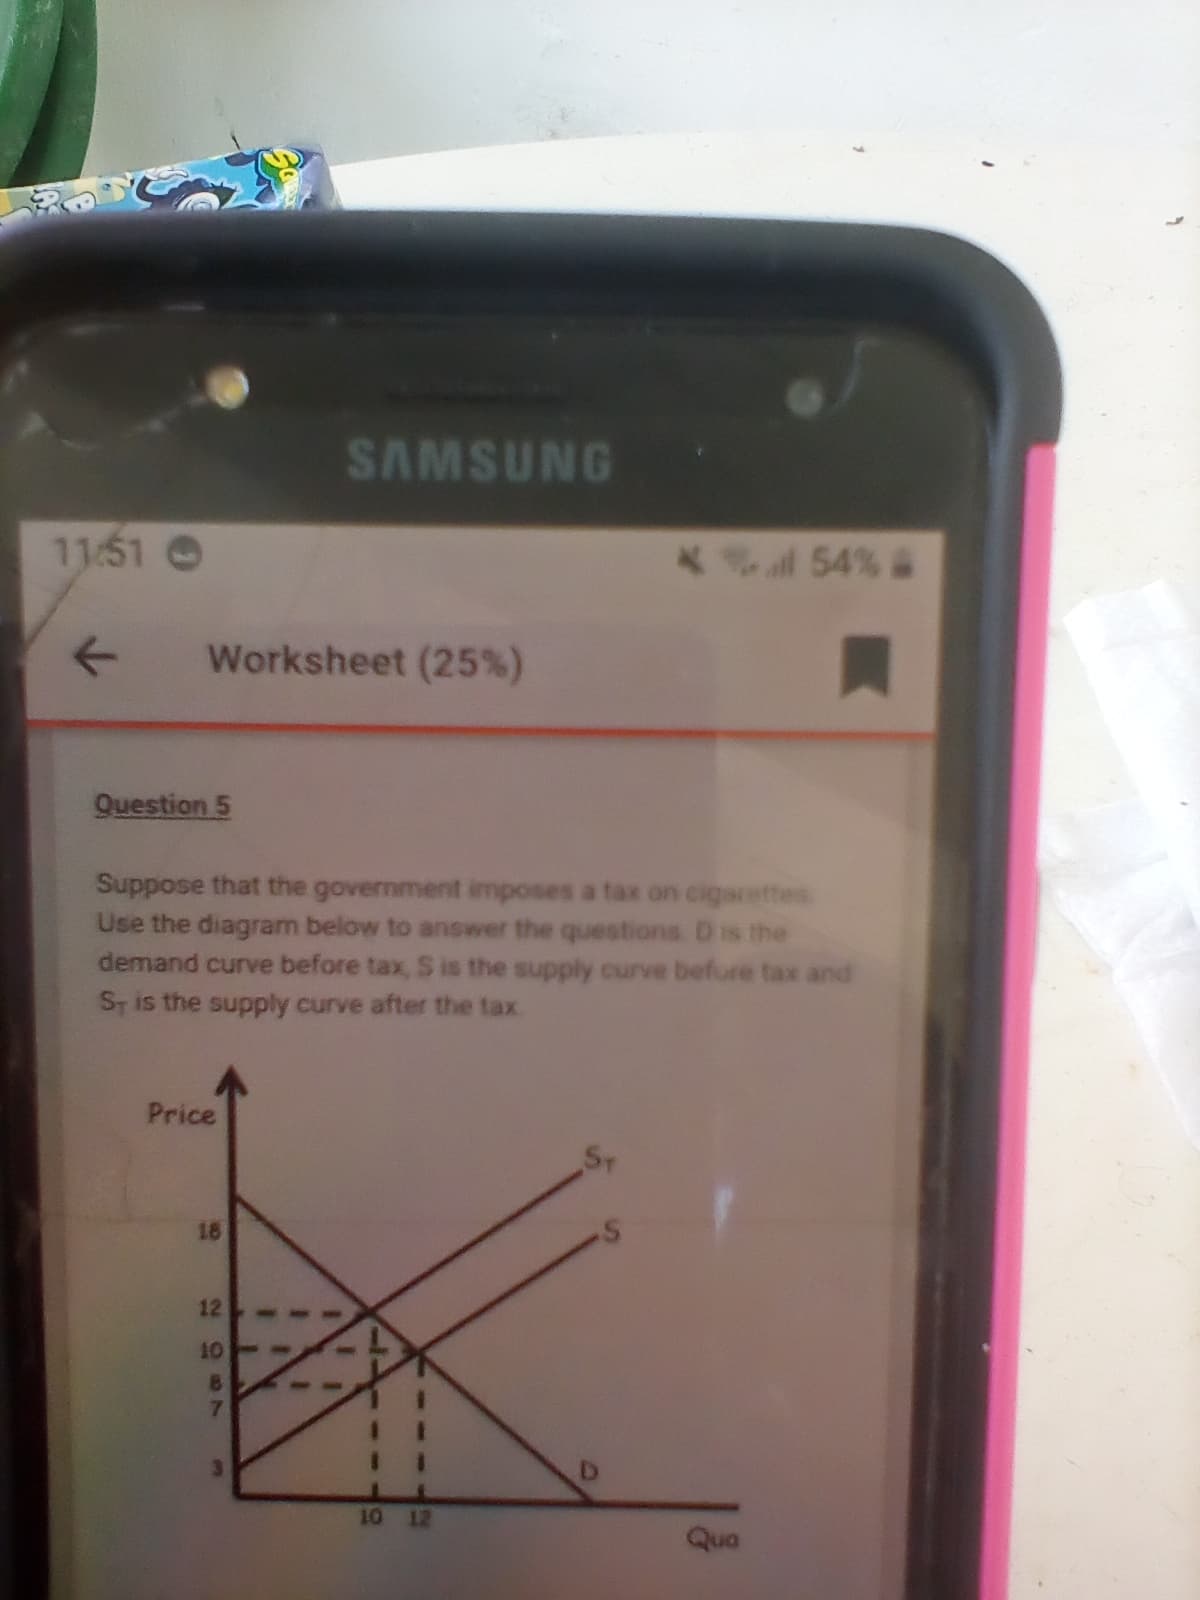 SAMSUNG
11:51 O
*54% &
Worksheet (25%)
Question 5
Suppose that the government imposes a tax on cigarettes
Use the diagram below to answer the questions Dis the
demand curve before tax, S is the supply curve befure tax and
ST is the supply curve after the tax
Price
18
12
10
7
D.
10 12
Qua
